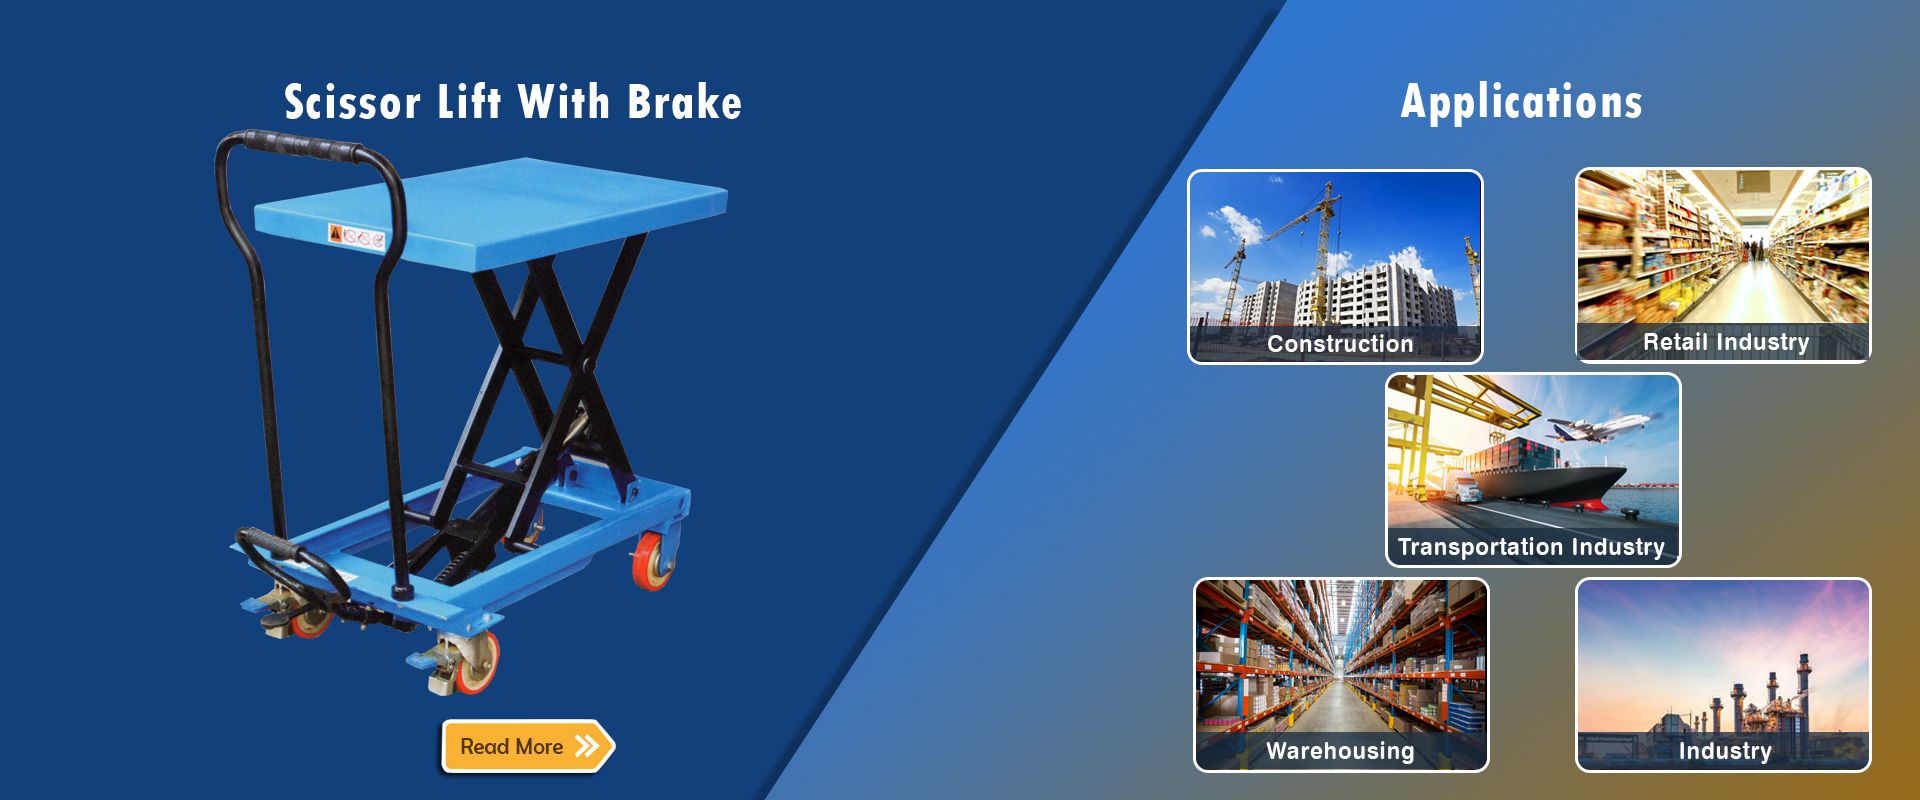 Hydraulic Lift Table For Food And Beverages Industry, Hydraulic Lift Table For For Dairy, Hydraulic Lift Table For Food Processing, Stainless Steel Hydraulic Lift Table, Ss Hydraulic Lift Table, Ms Hydraulic Lift Table, Easy To Operate Hydraulic Lift Table, Antistatic Hydraulic Lift Table, Scissor Lifts With Brake.